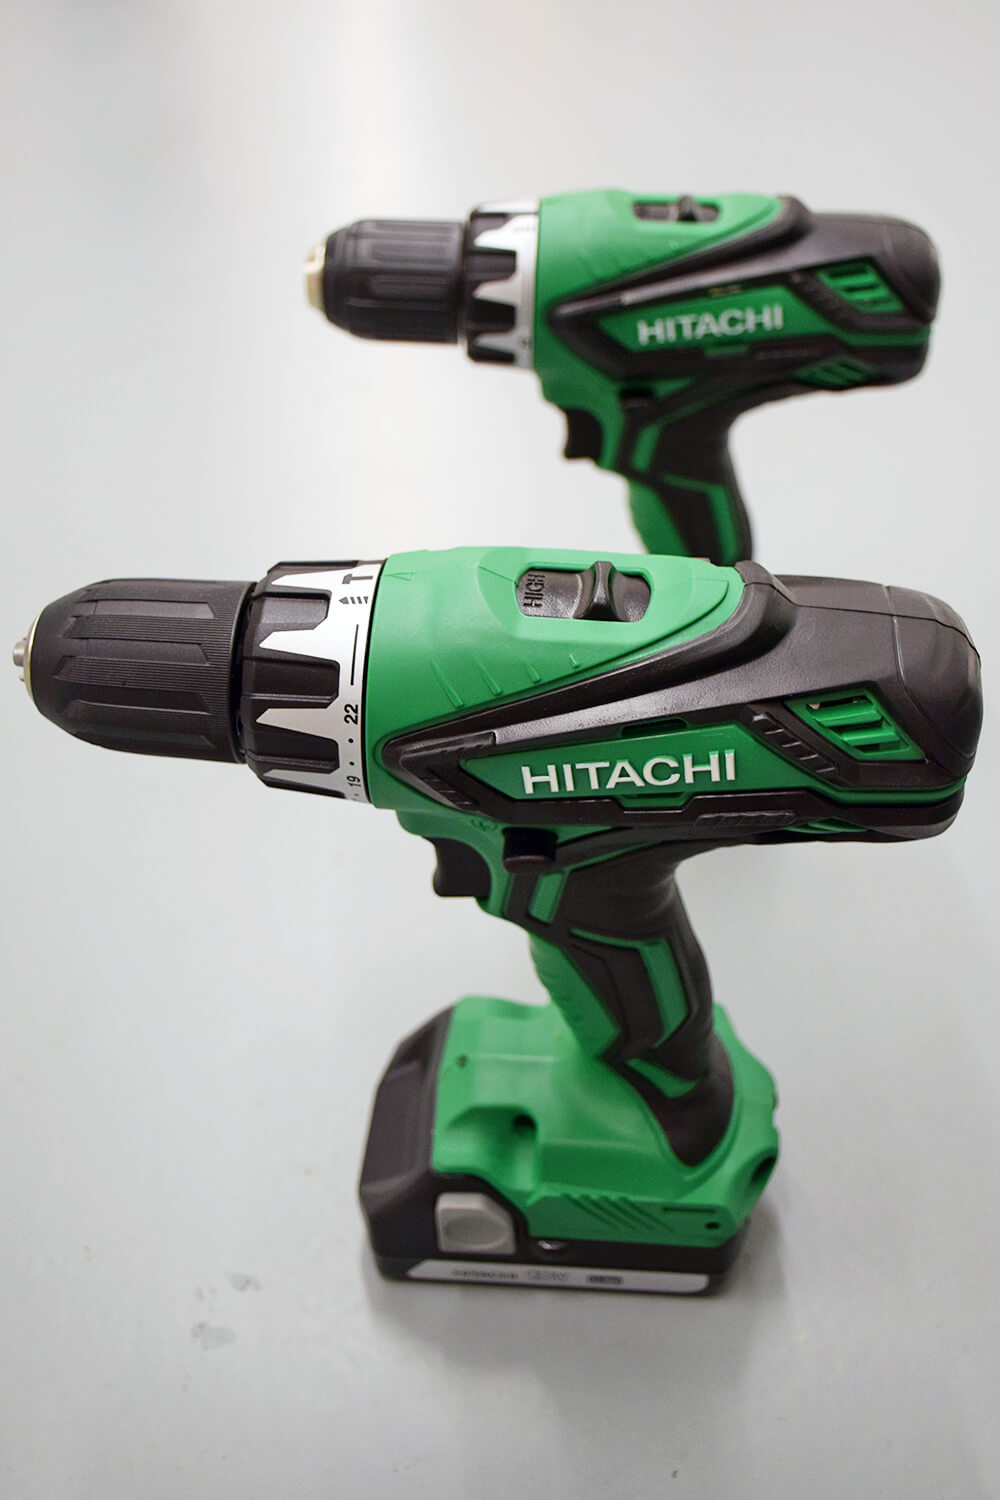 hitachi-18v-combi-and-driver-drill-set-product-review-1